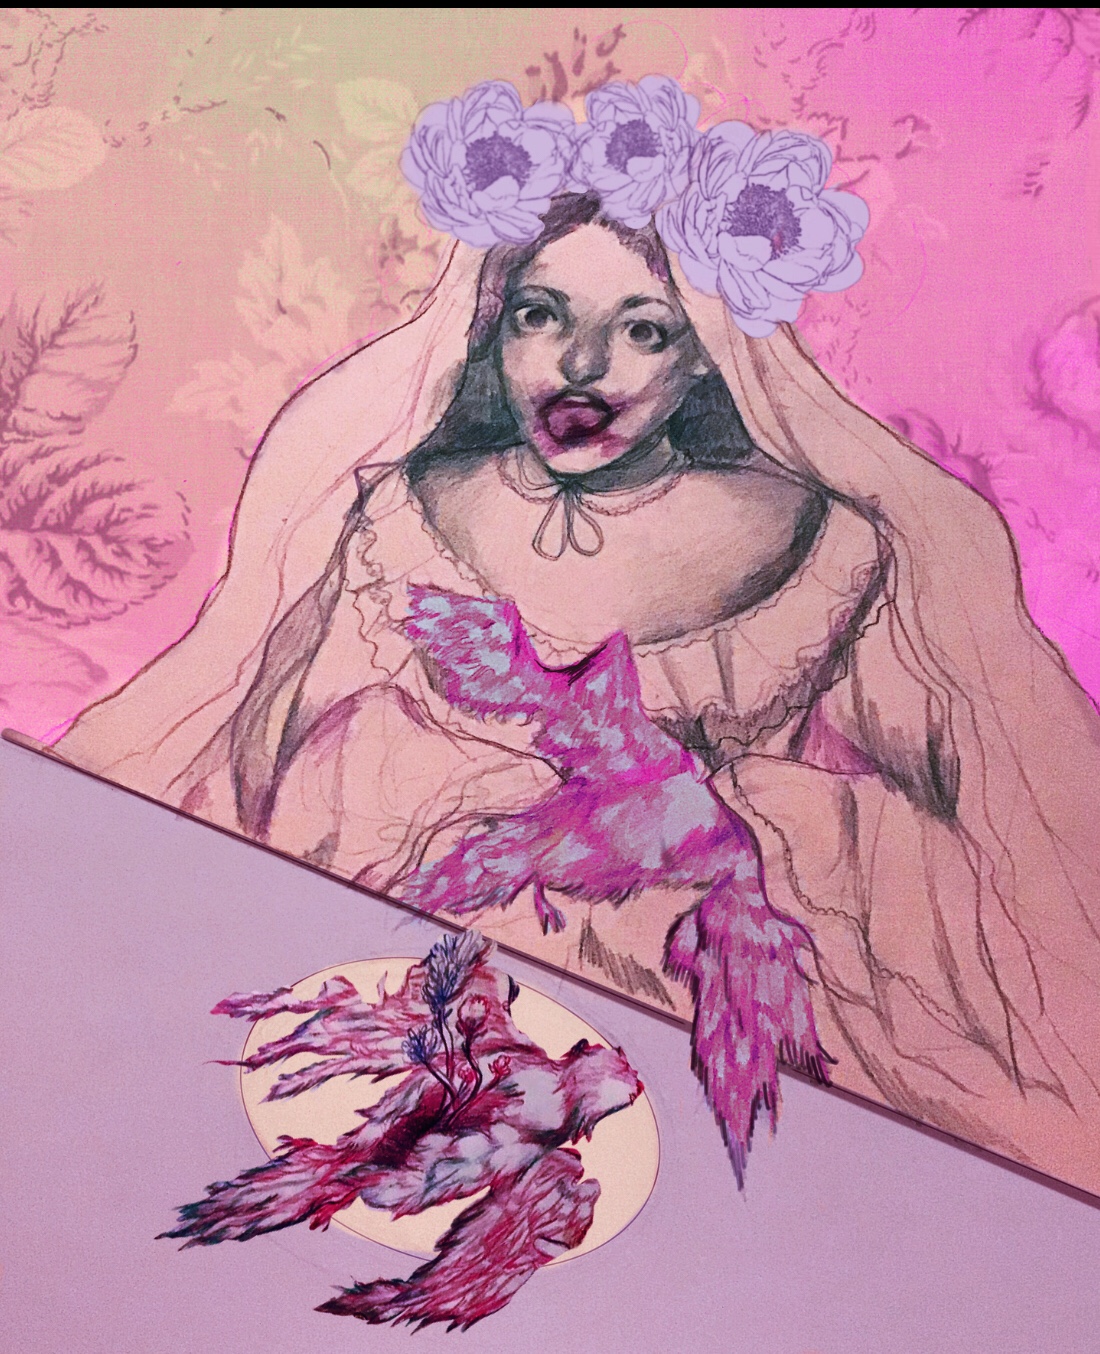 Bridal Feast, Mixed Media (traditional and digital media), 1100px x 1354px, 2021